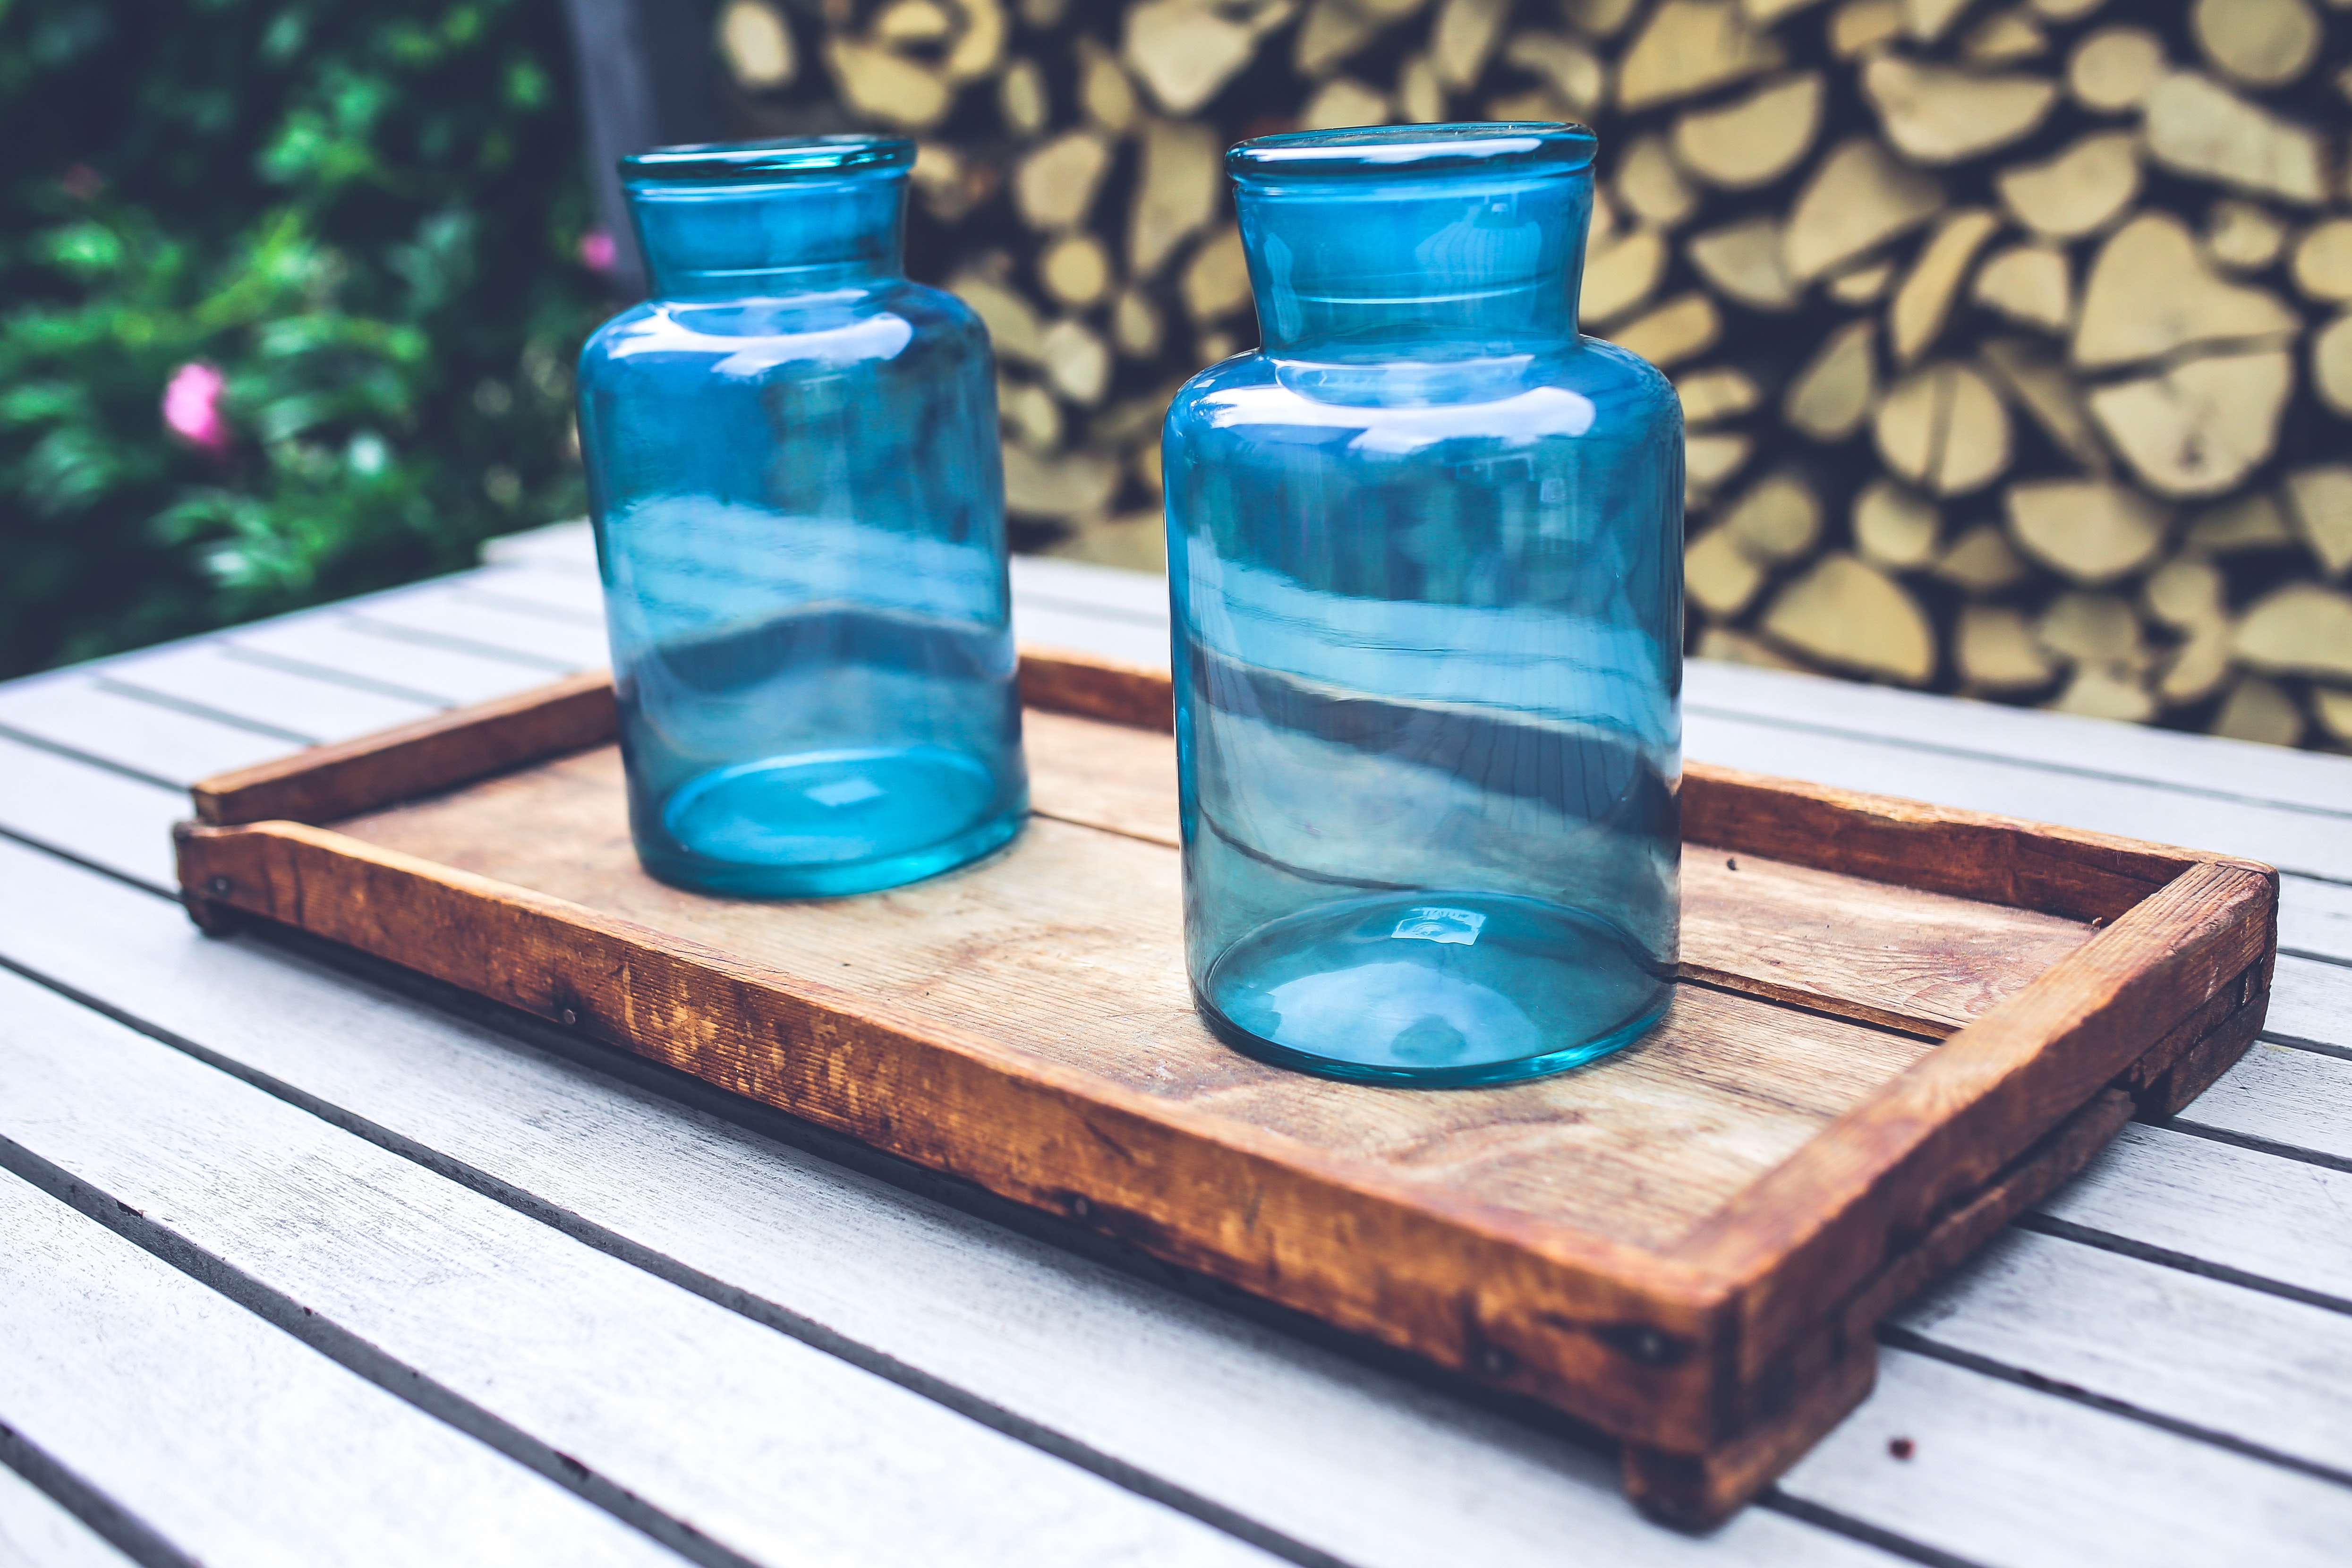 Two blue jars on the wooden tray photo